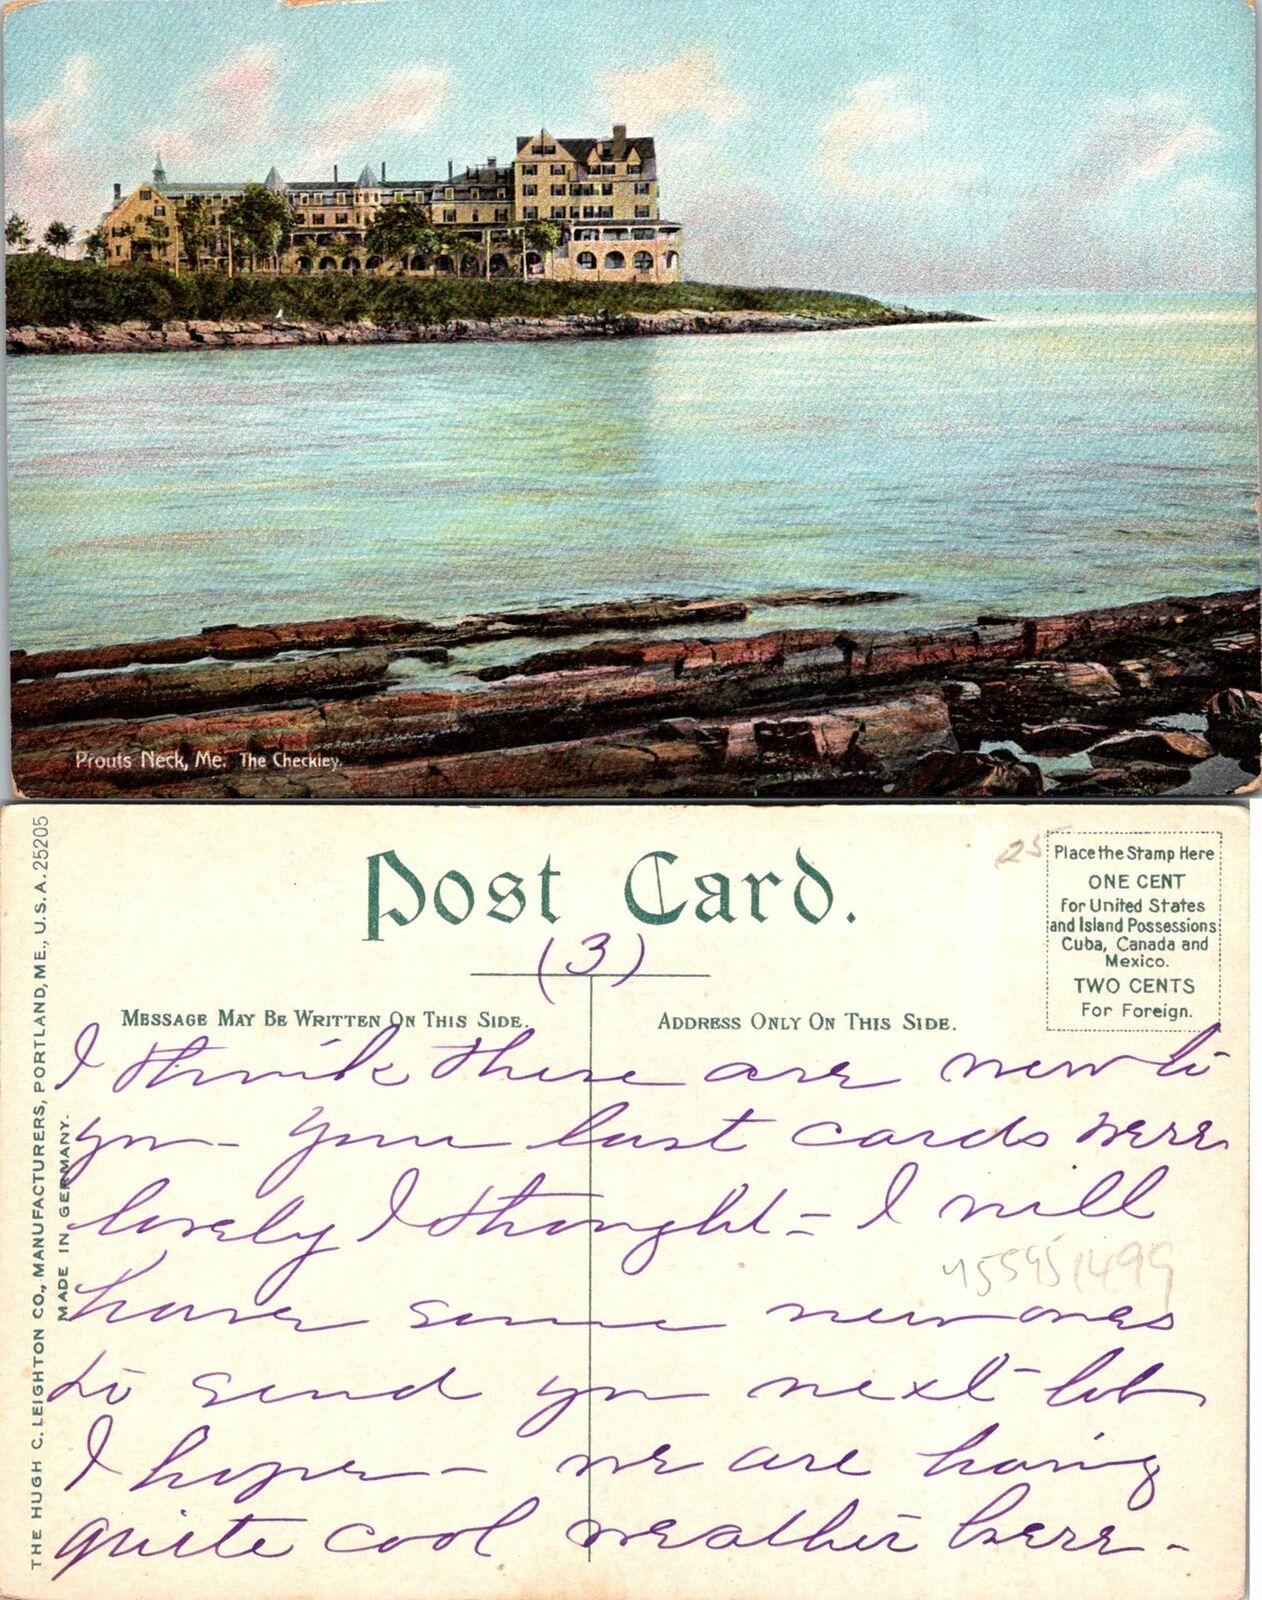 Prouts Neck ME The Checkley Postcard Used (45595)